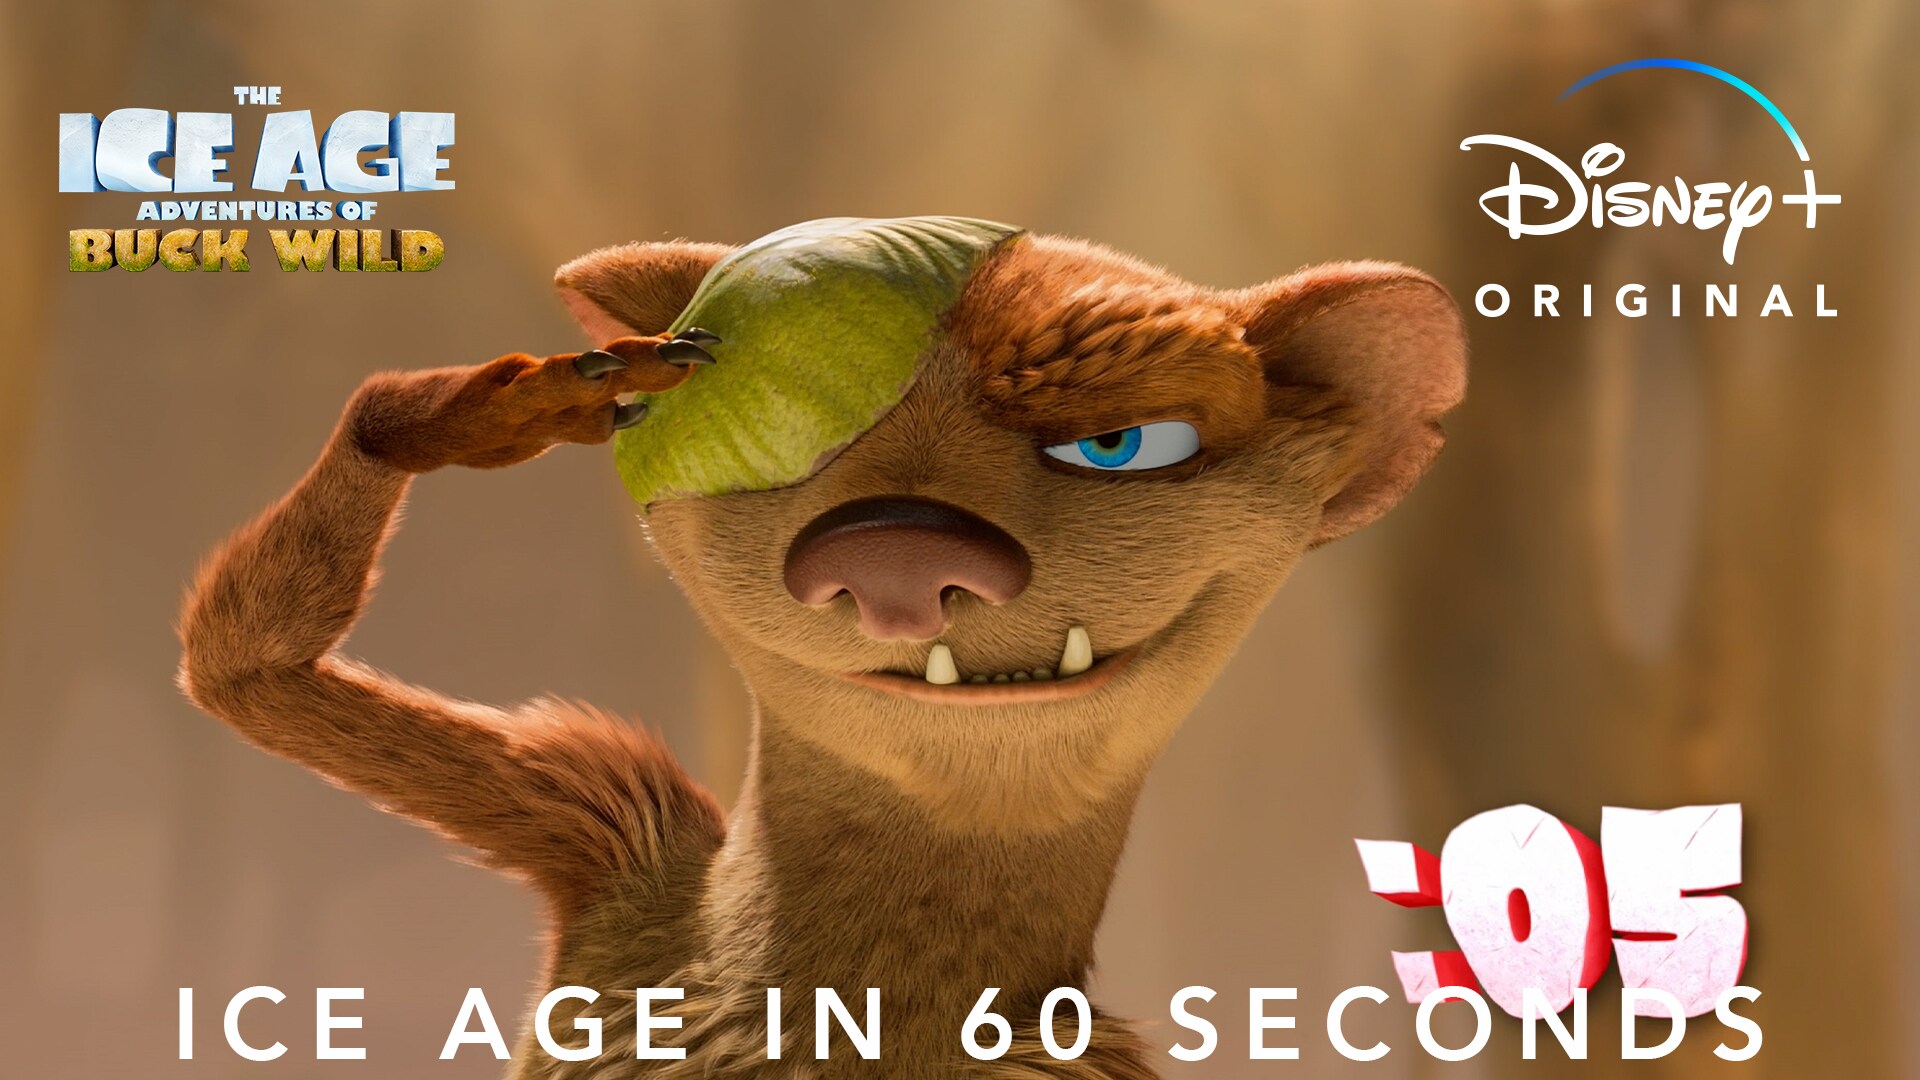 The Ice Age Adventures of Buck Wild | Ice Age in 60 Seconds | Disney+